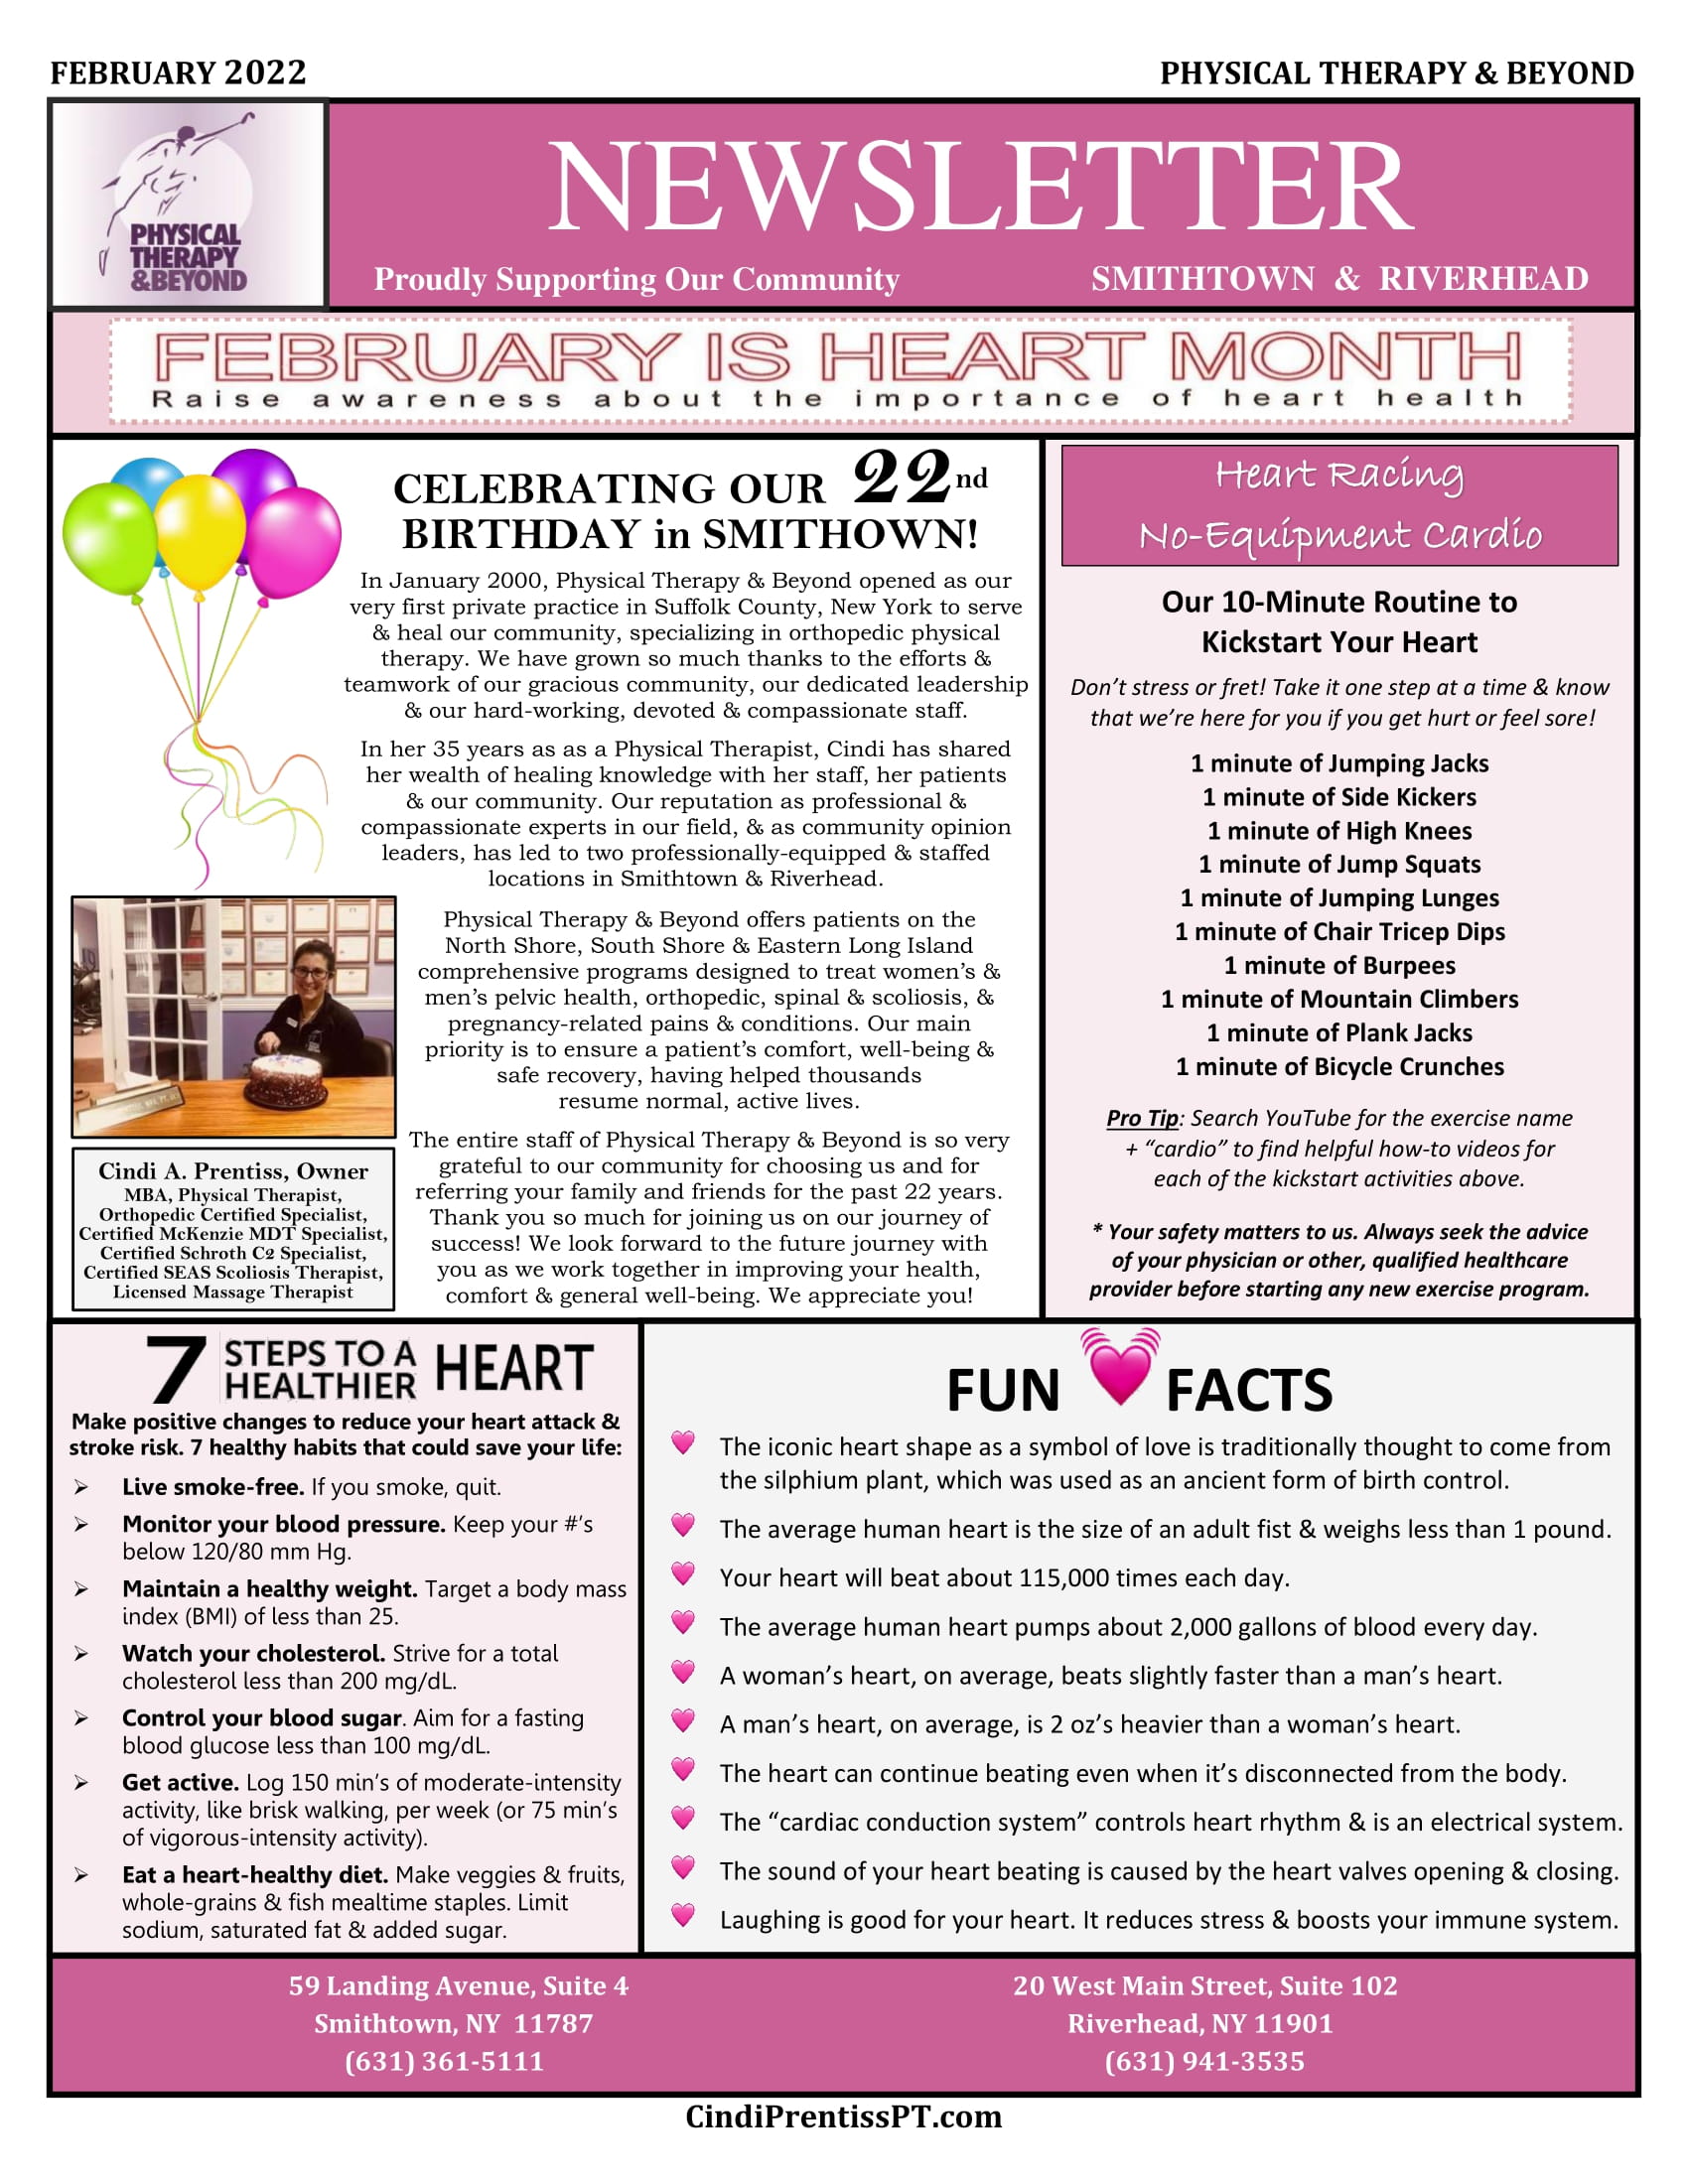 Physical Therapy & Beyond Newsletter - February 2022